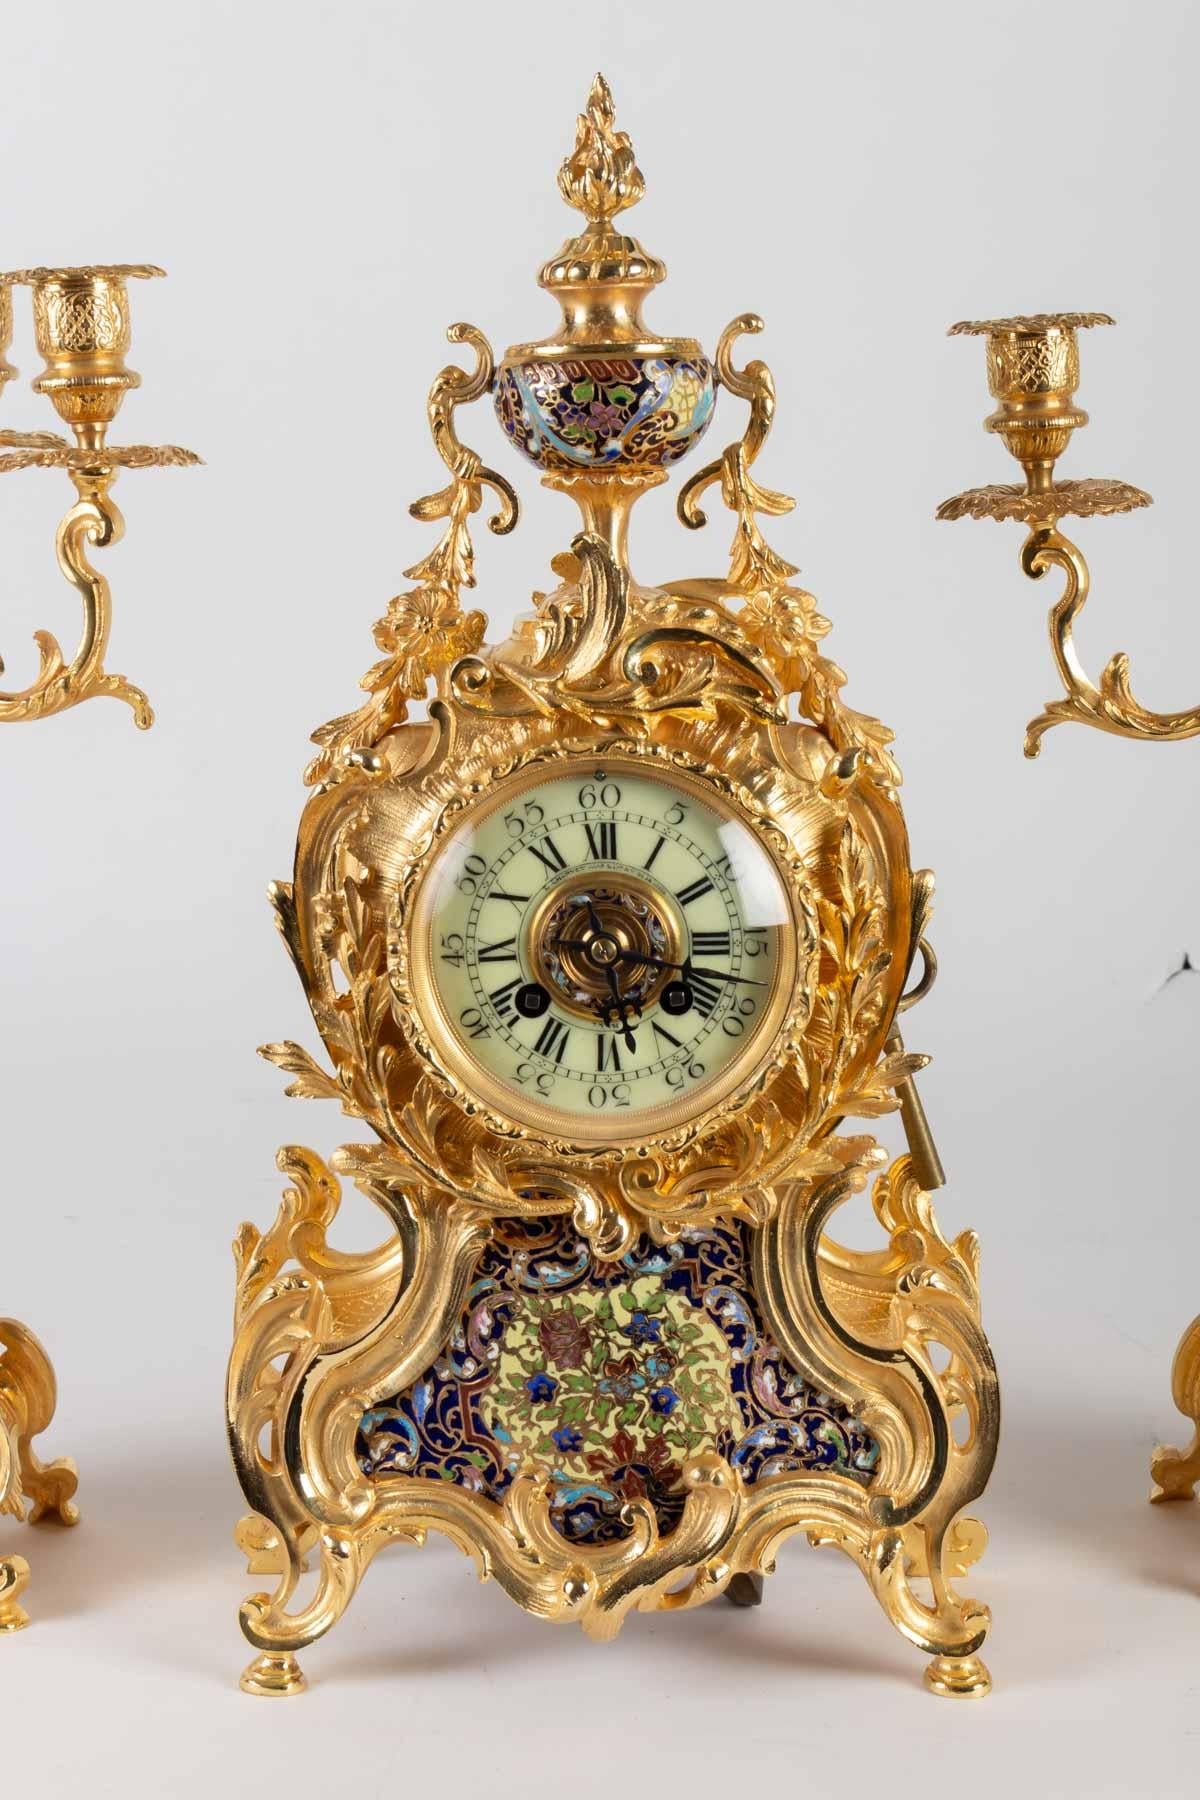 Fireplace set 19th century, composed of a clock and two candelabra, in gilded bronze and cloisonné enamel
Nap III period.
Clock H 45 cm / W 22 cm / D 12 cm
Candelabra H 49 cm / W 26 cm / D 12 cm.